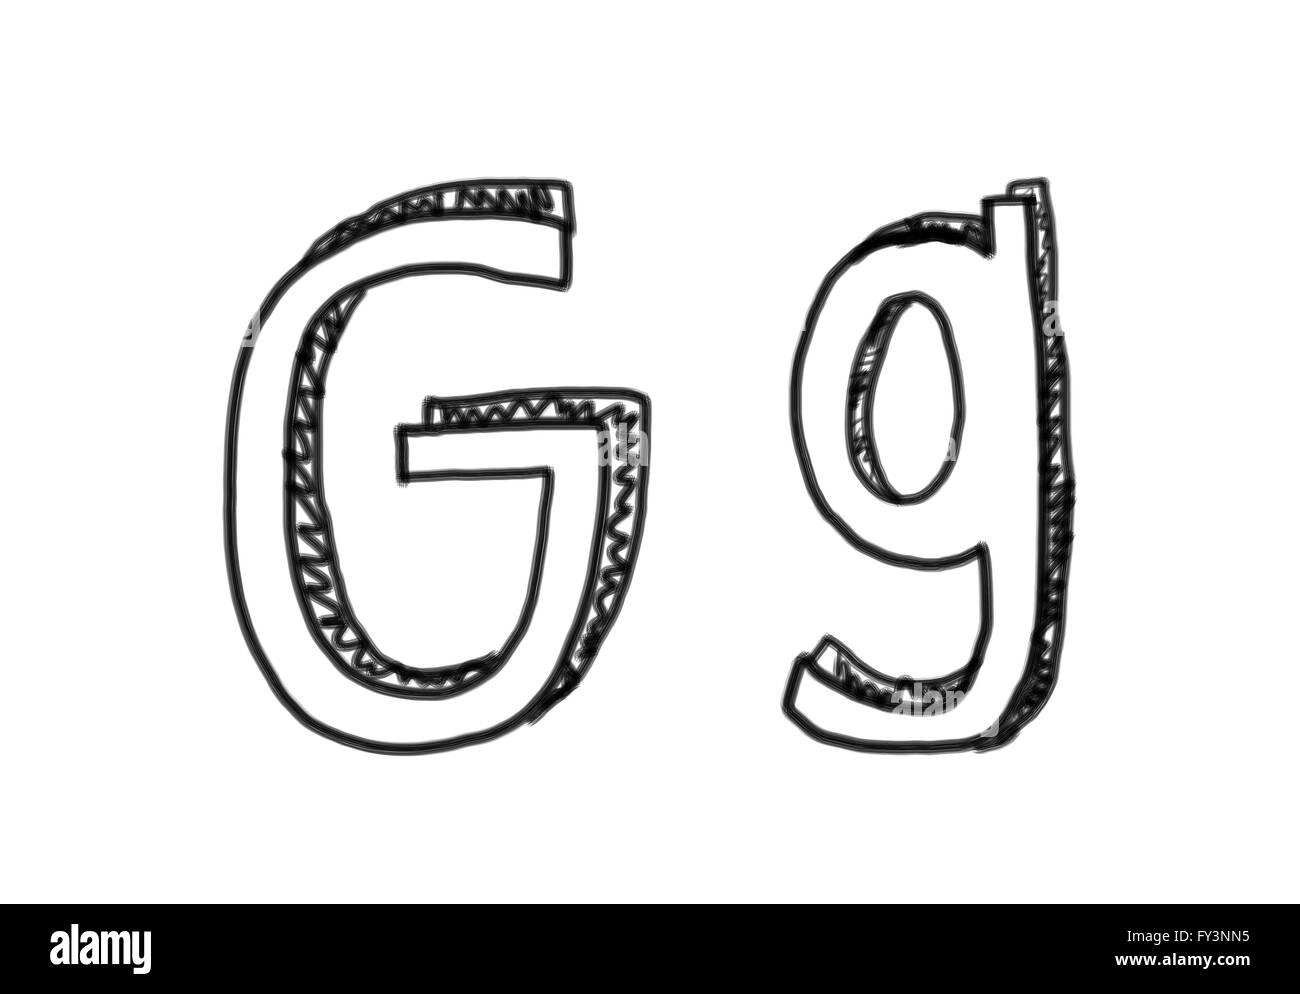 New drawing Character G of alphabet logo icon in design elements. Stock Photo